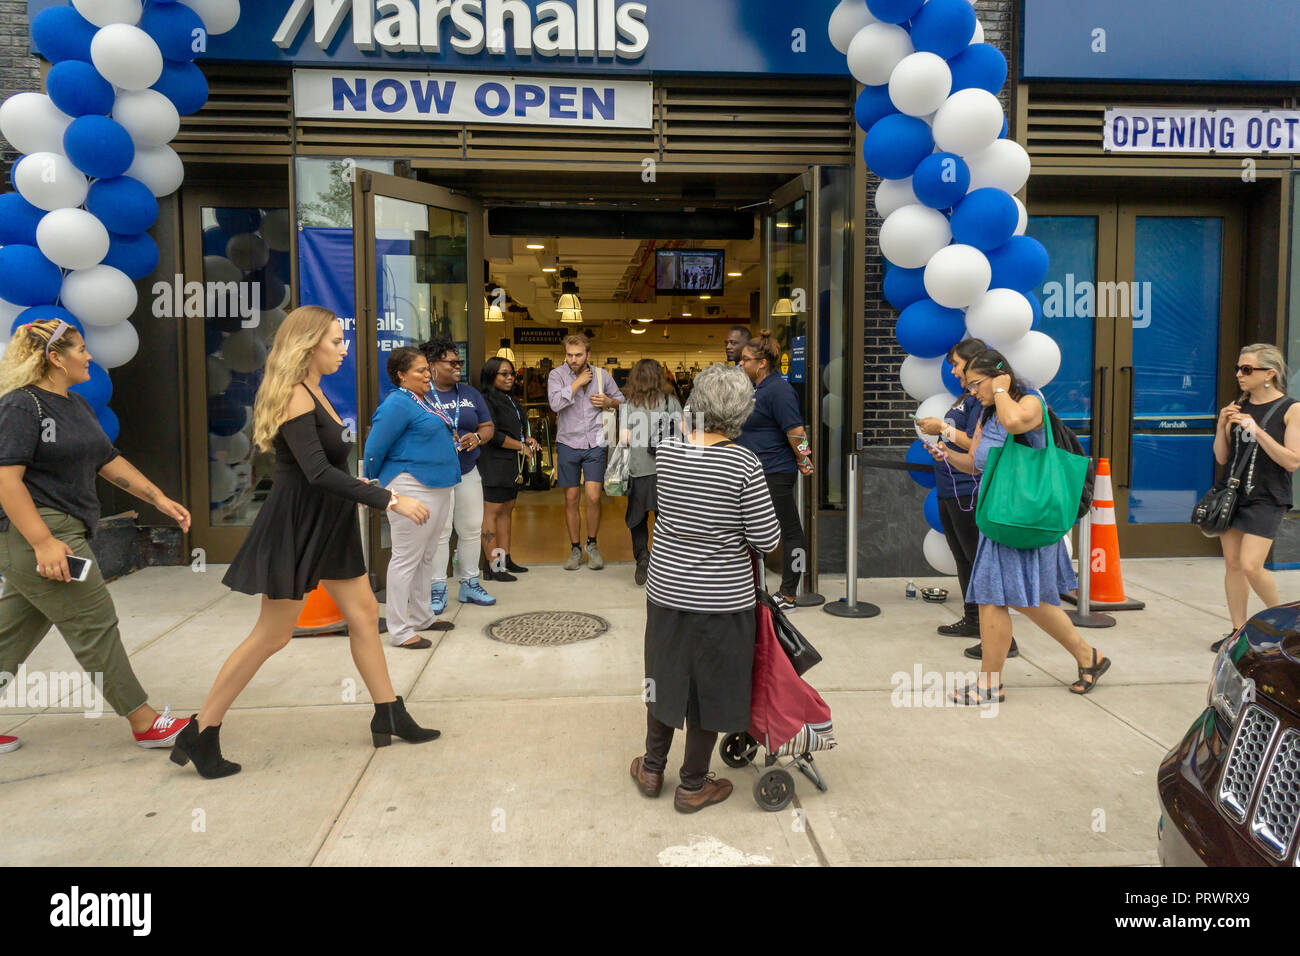 New York, USA. 4th October, 2018. Customers outside the brand new off-price Marshalls store in the Lower East Side neighborhood of in New York during it's grand opening on Thursday, October 4, 2018. Marshalls is a brand of the TJX Companies, parent of Marshalls, T. J. Maxx, HomeGoods and other brands. TJX Companies recently reported comps that grew 6% over year citing increased traffic in its Marmaxx division (Marshalls, TX Maxx). (Â© Richard B. Levine) Credit: Richard Levine/Alamy Live News Stock Photo